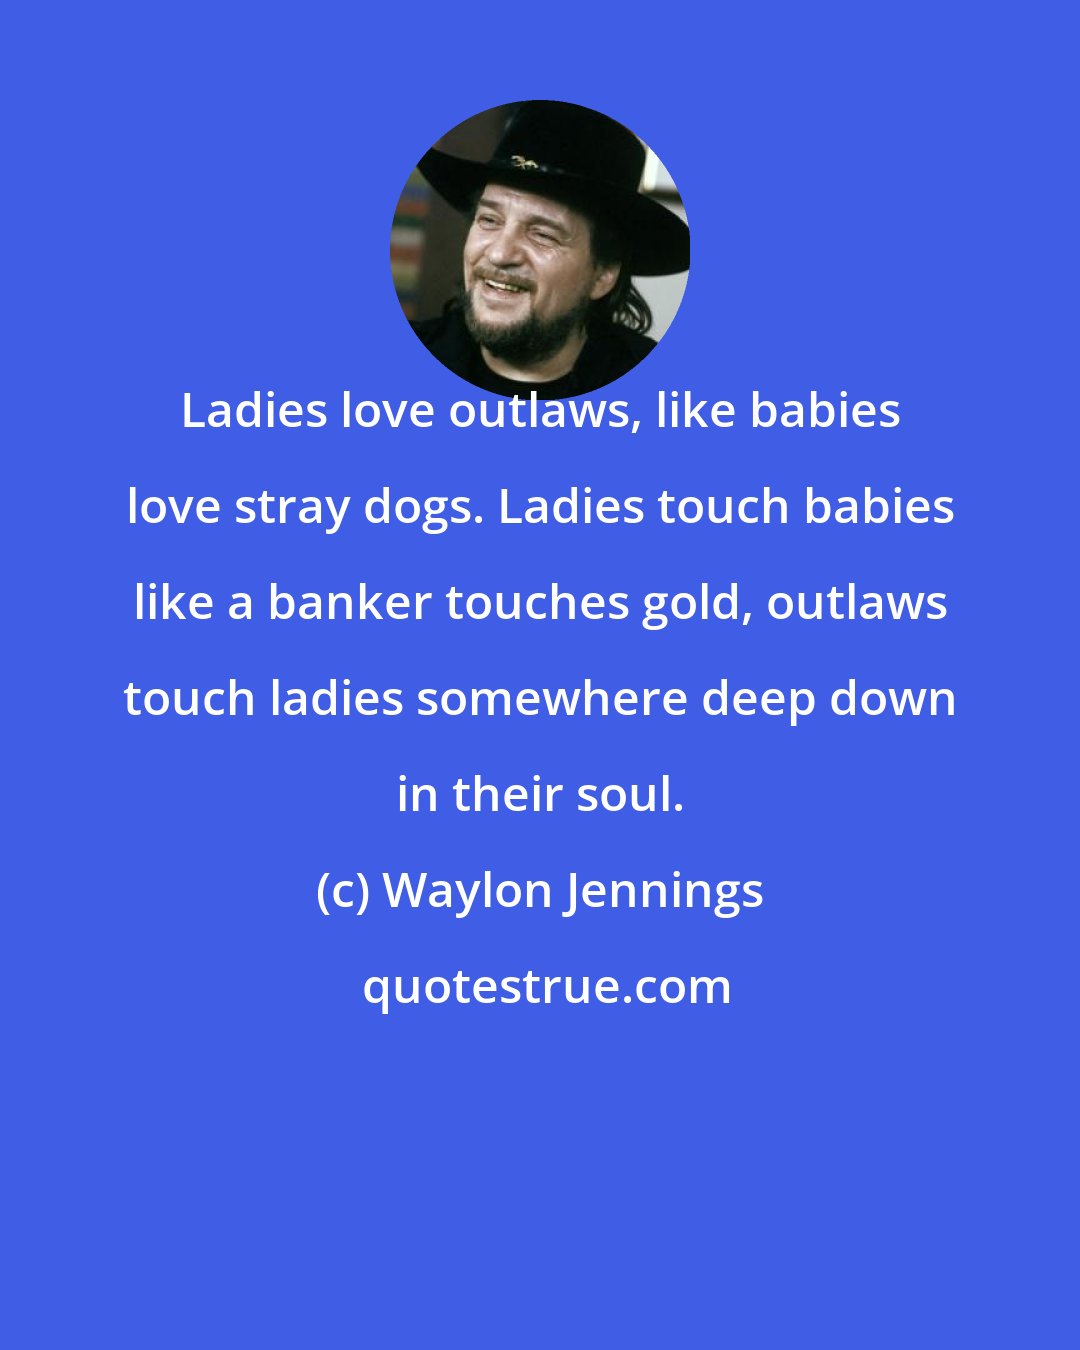 Waylon Jennings: Ladies love outlaws, like babies love stray dogs. Ladies touch babies like a banker touches gold, outlaws touch ladies somewhere deep down in their soul.